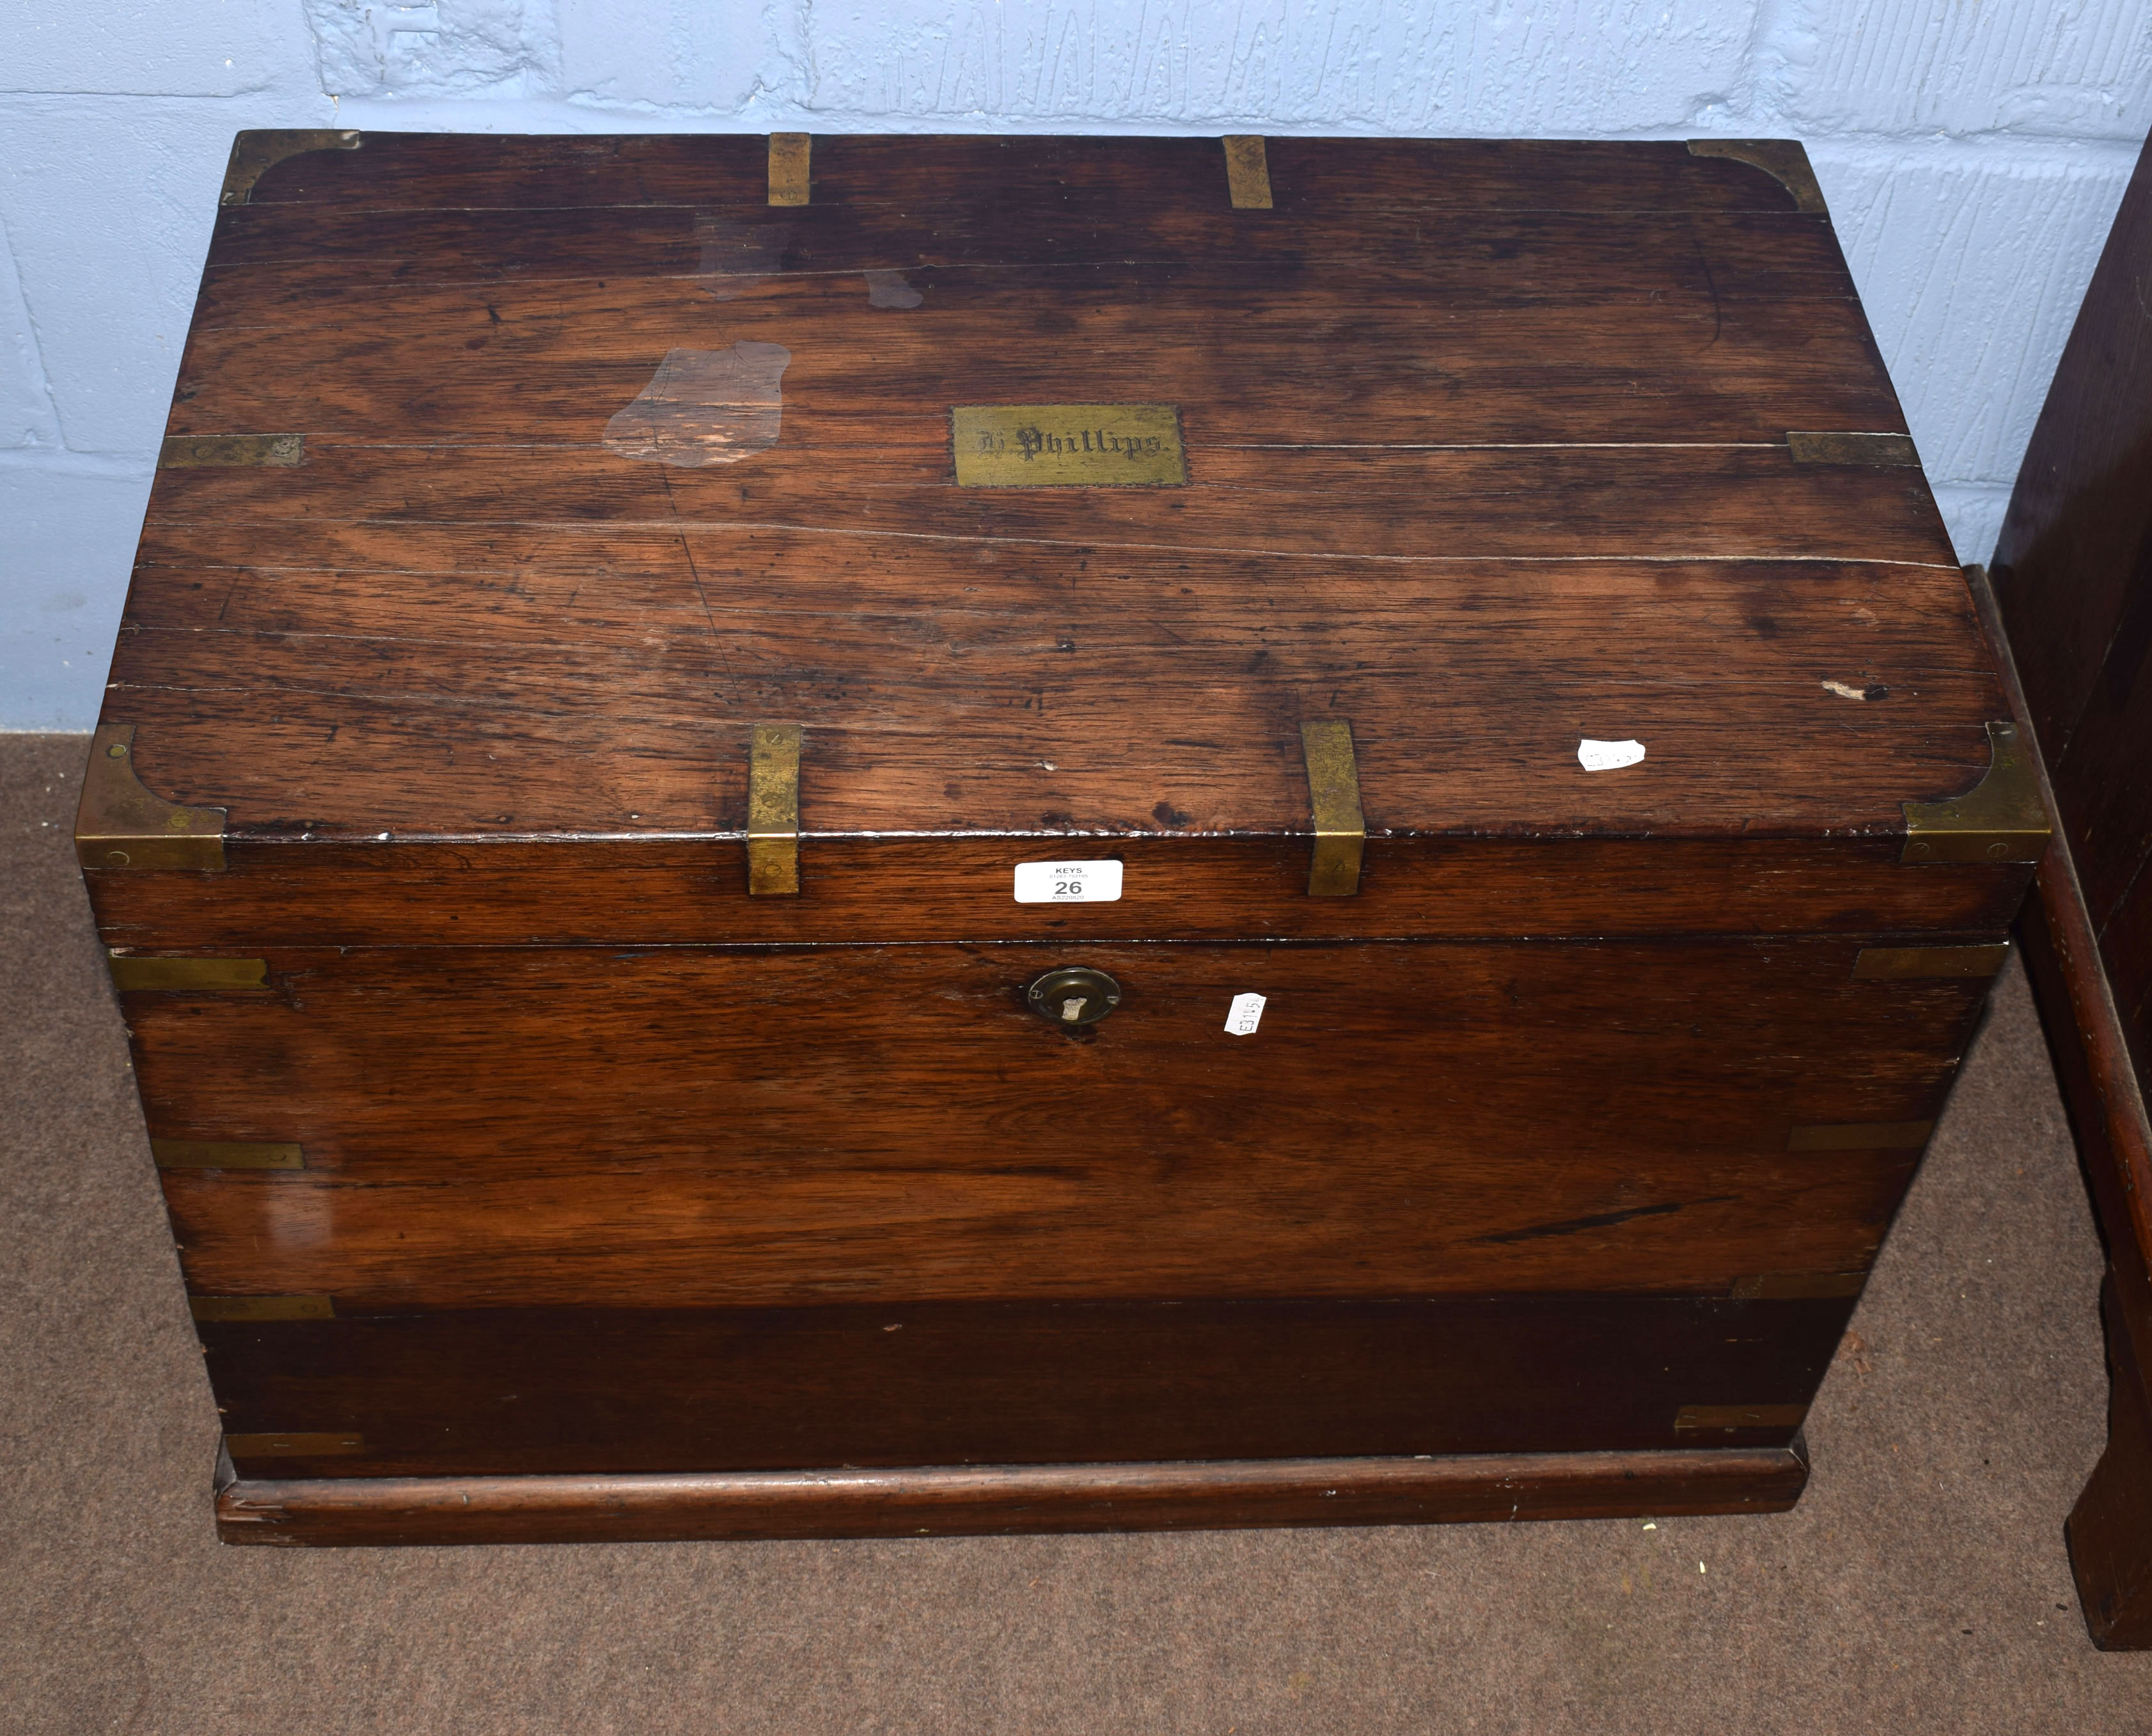 19th century brass bound polished oak silver chest, the lid inset with name plate inscribed "H